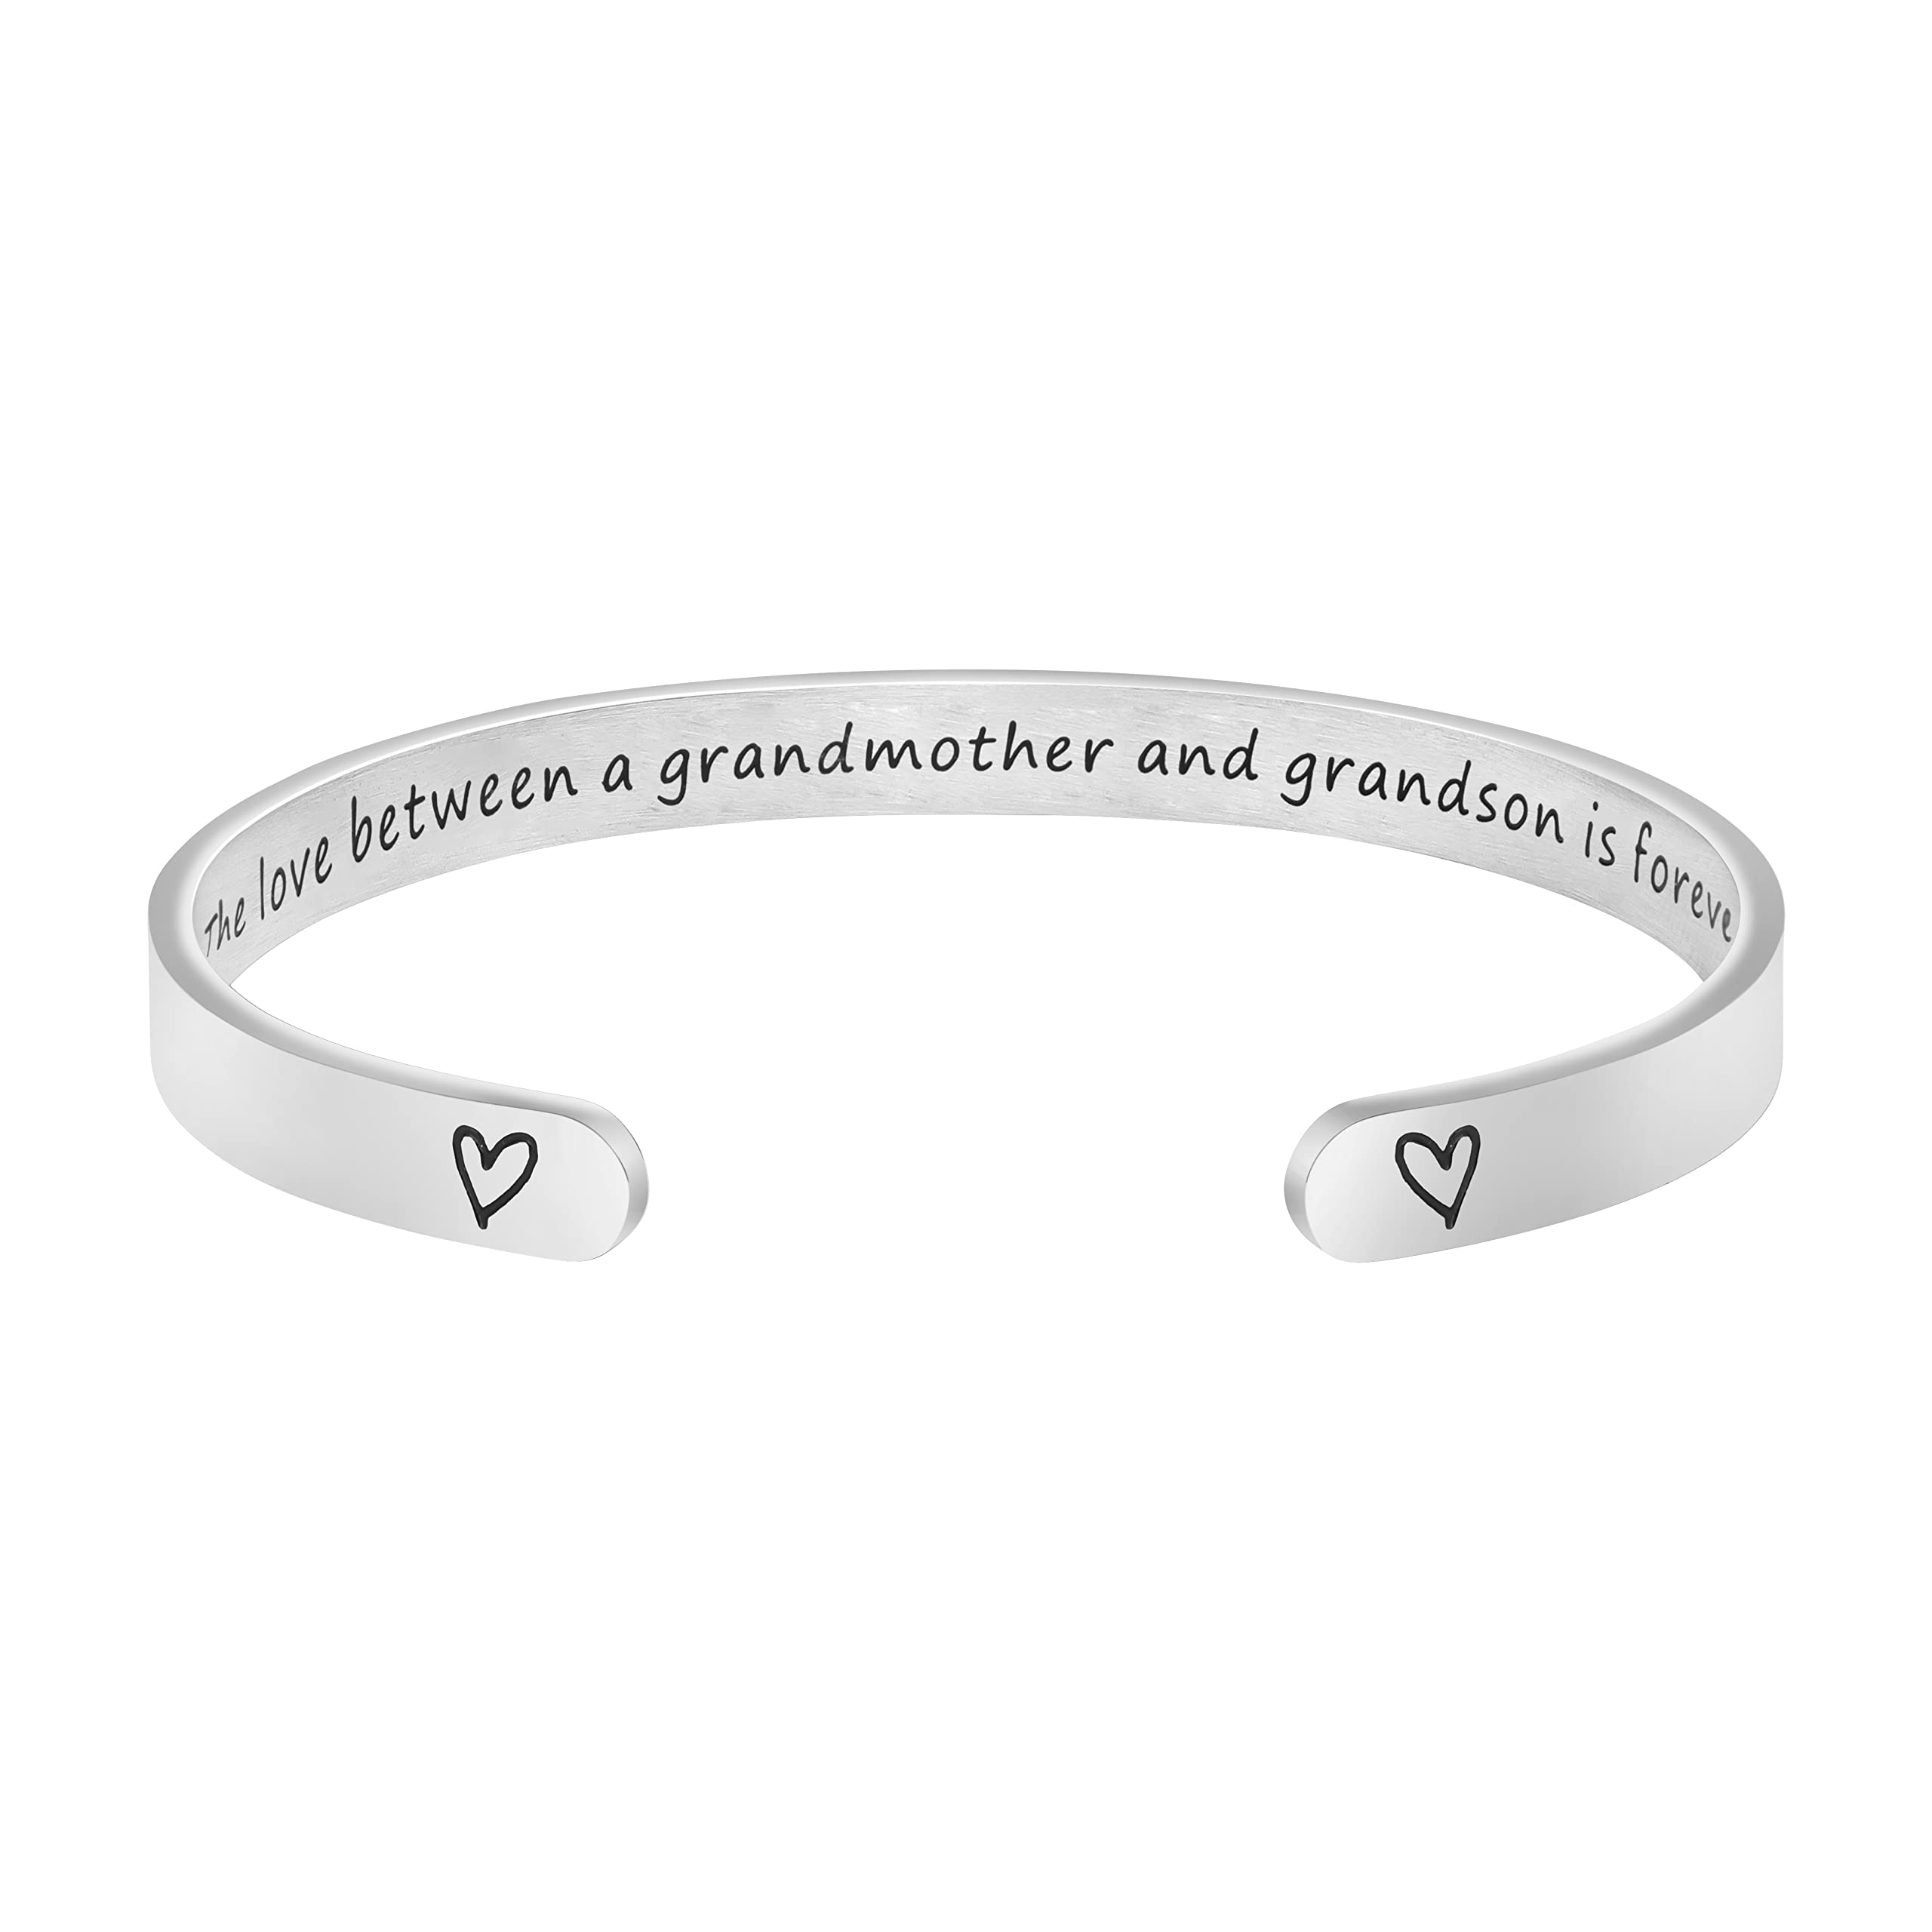 JoycuFF Grandmother Gifts From Grandson Granddma Birthday Jewelry for Grandmother Thank You Appreciation Gifts for Granddma Pers